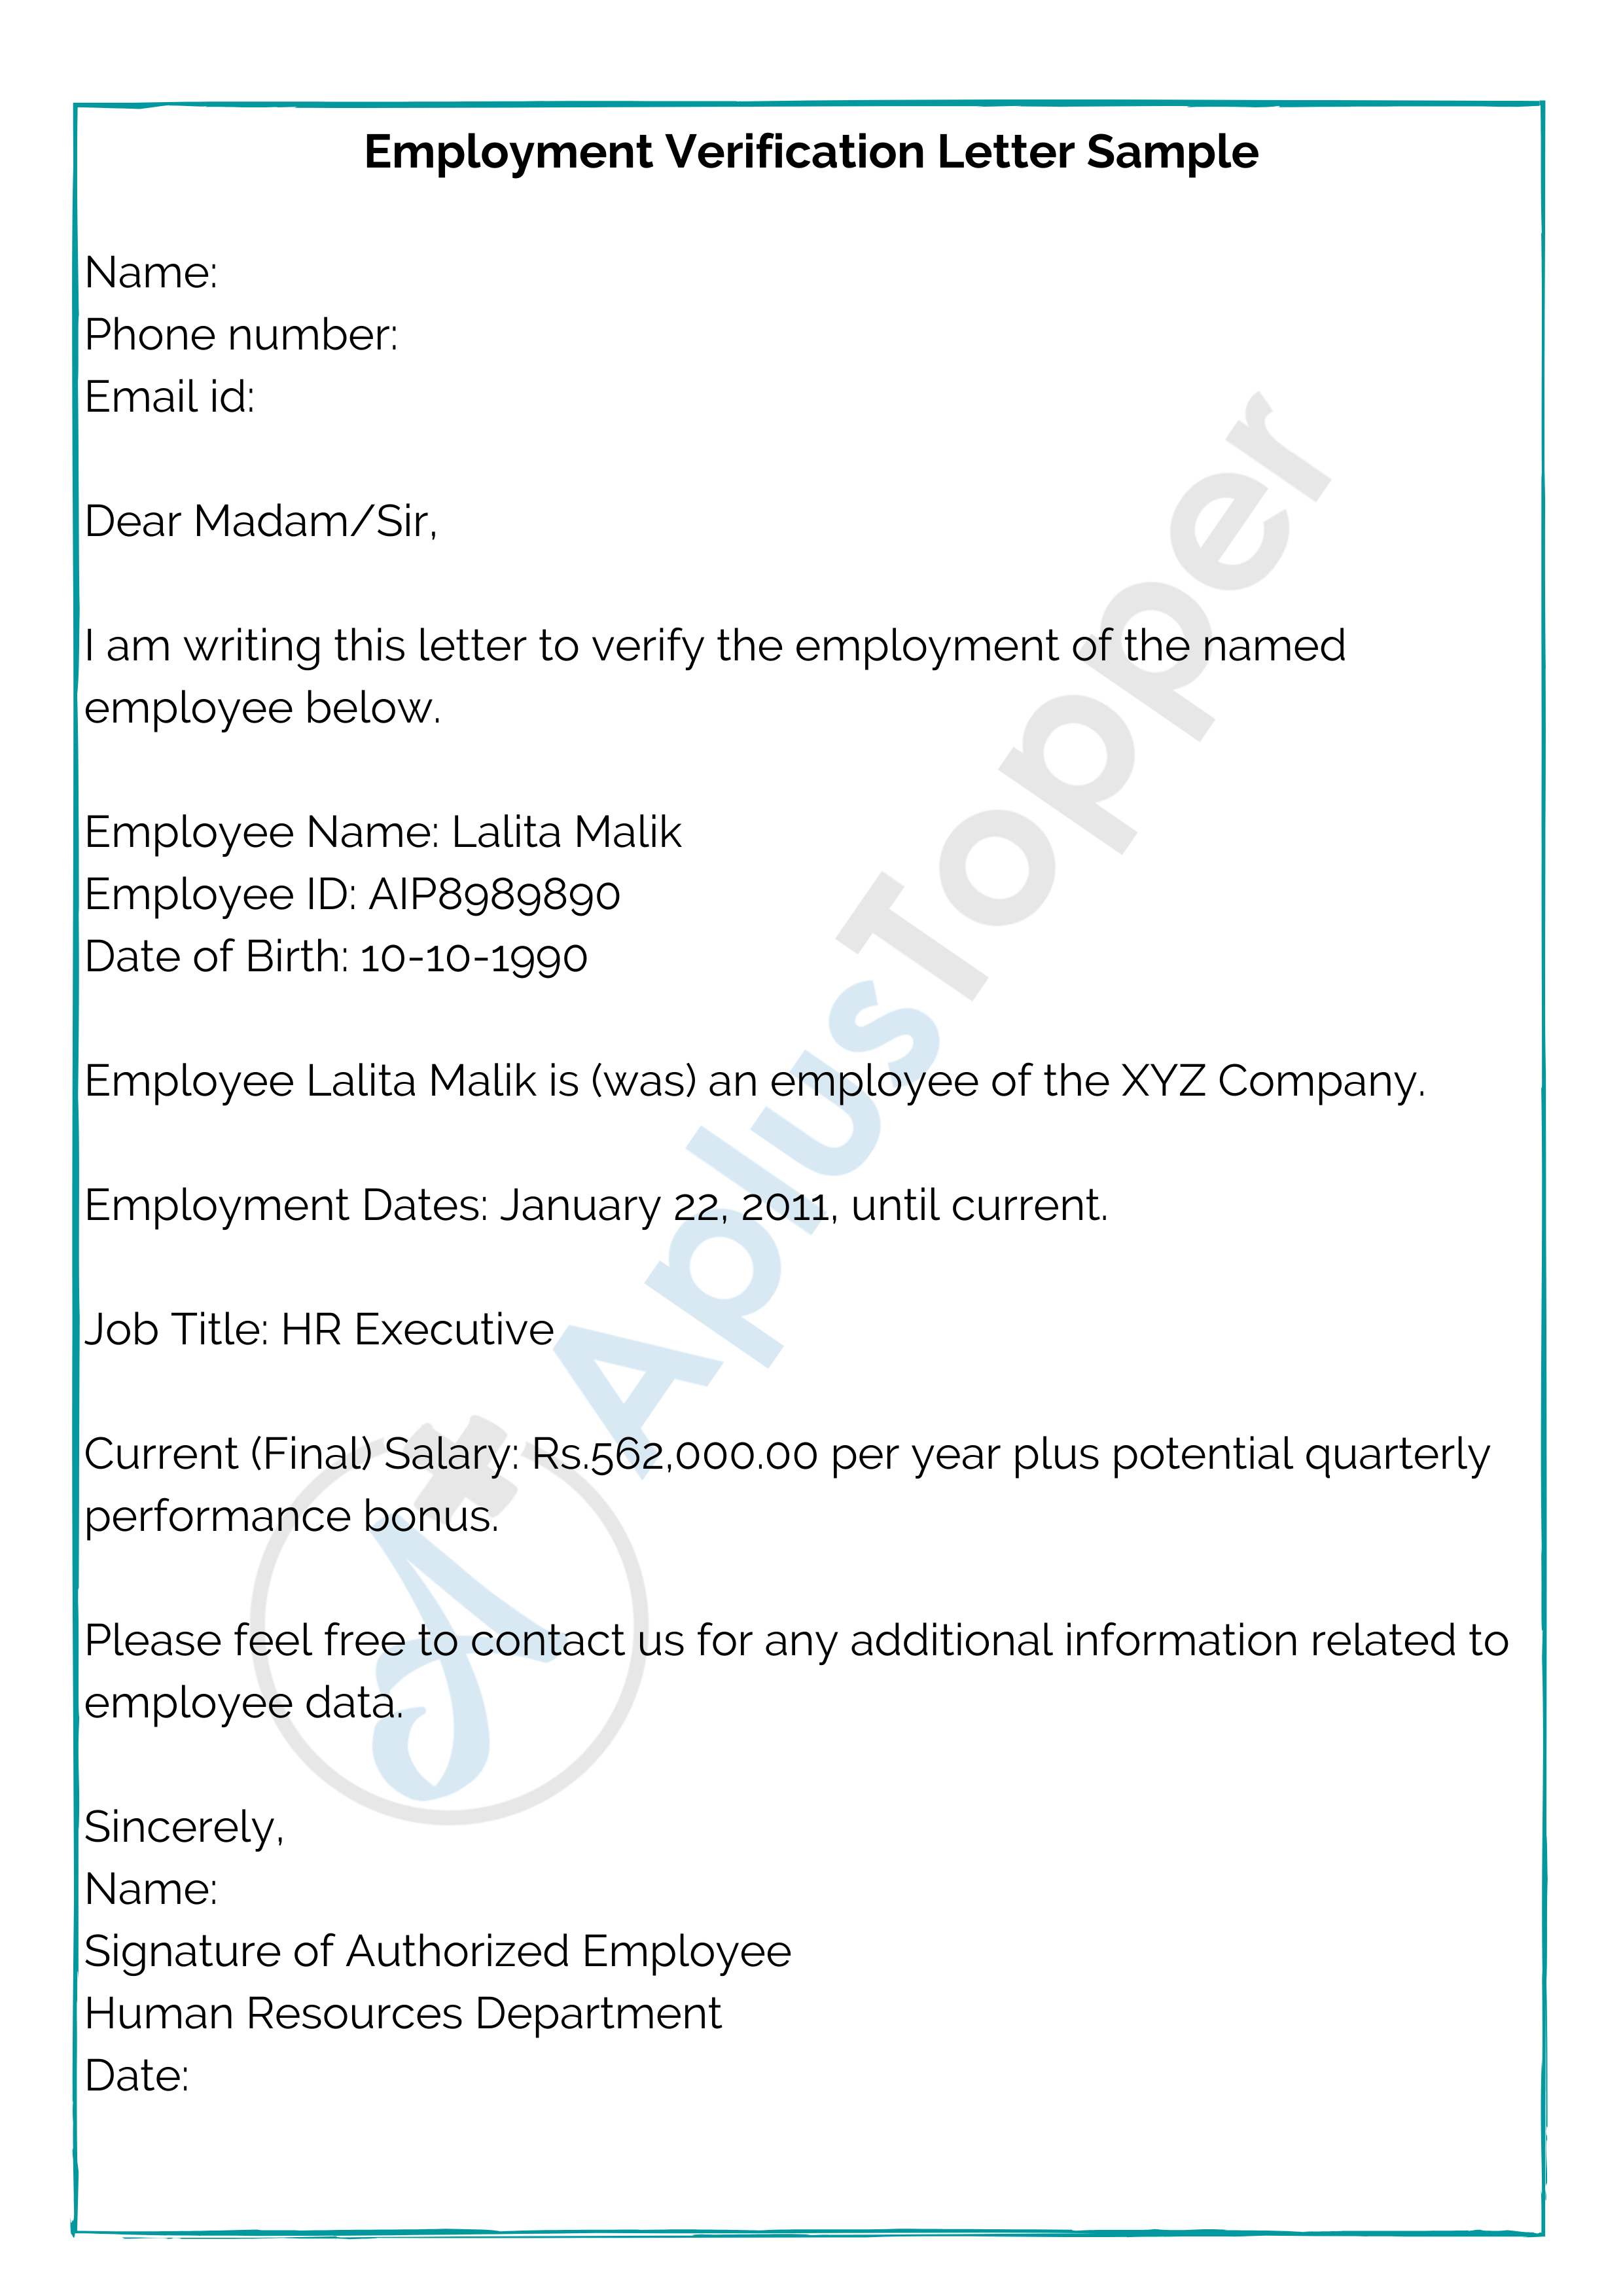 Employment Verification Letter  Format, Sample and Need of